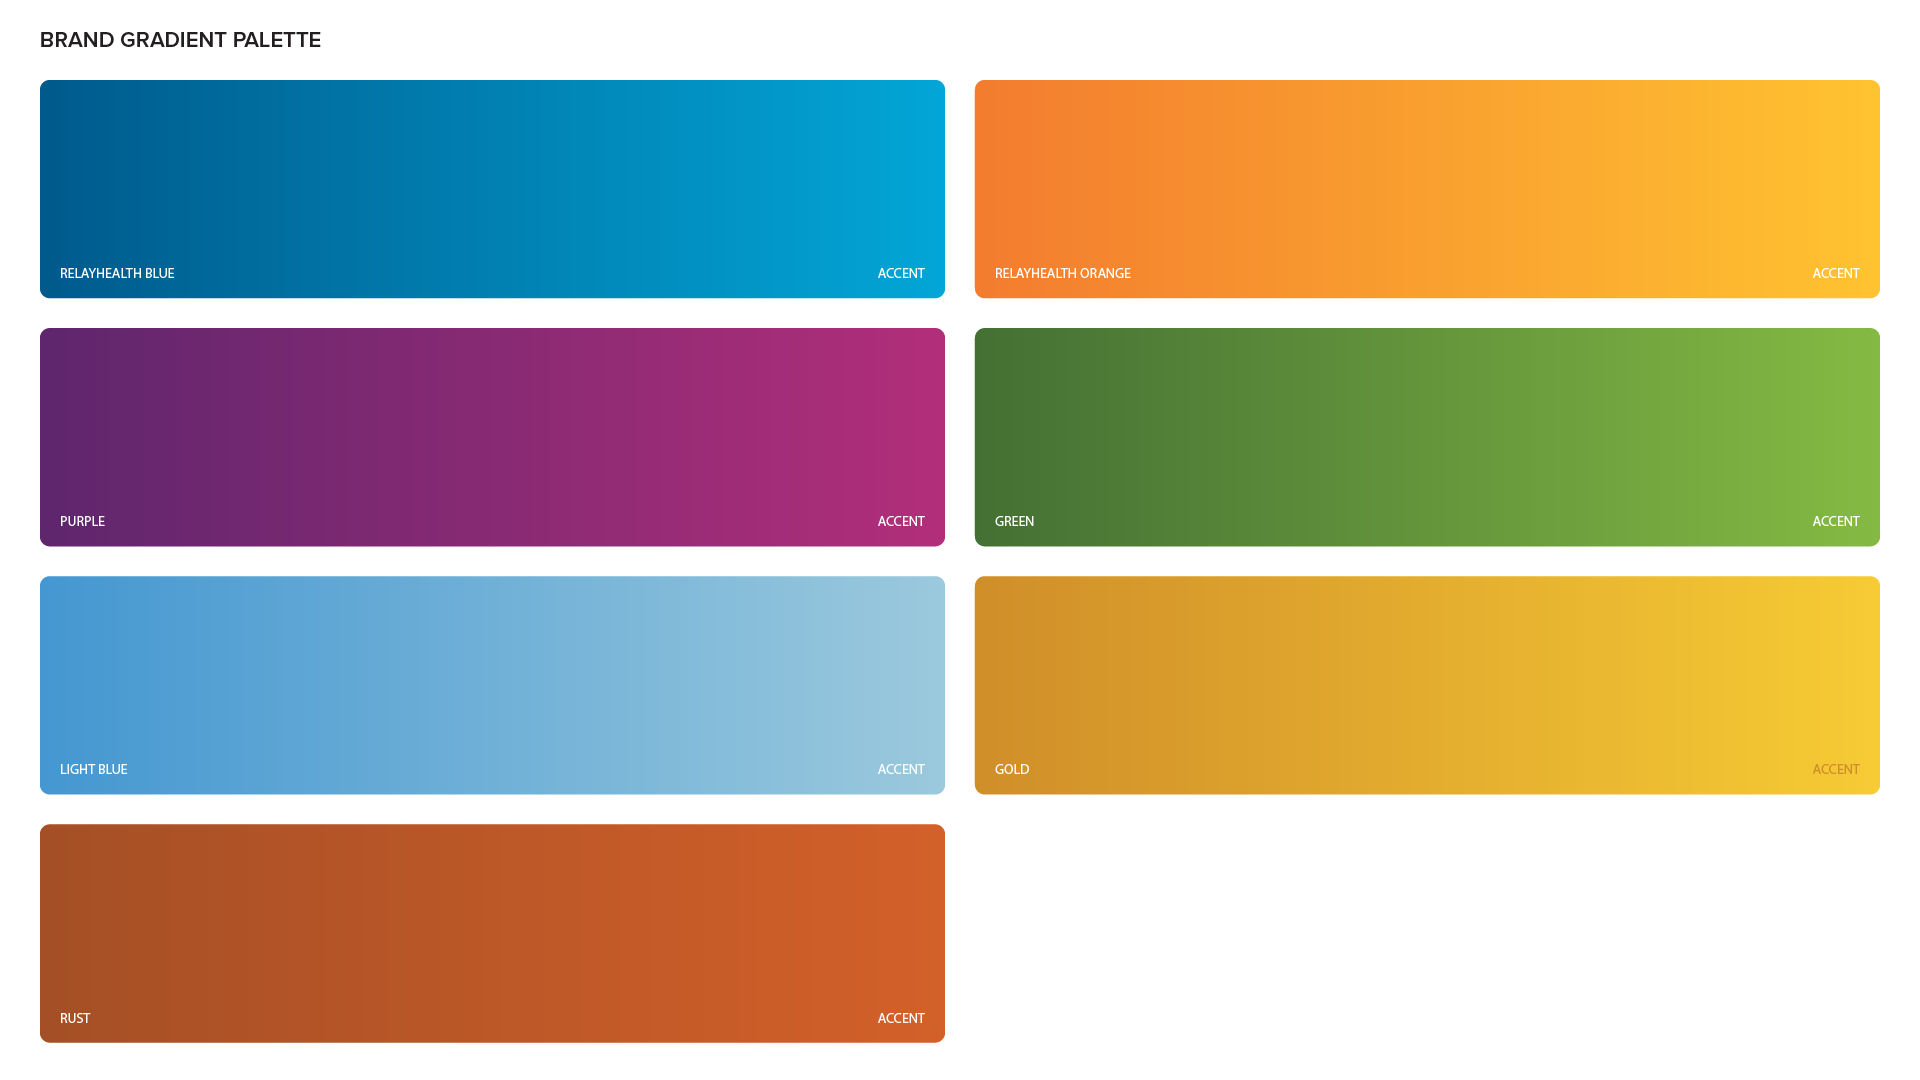 02-03-guide_highlights-gradients